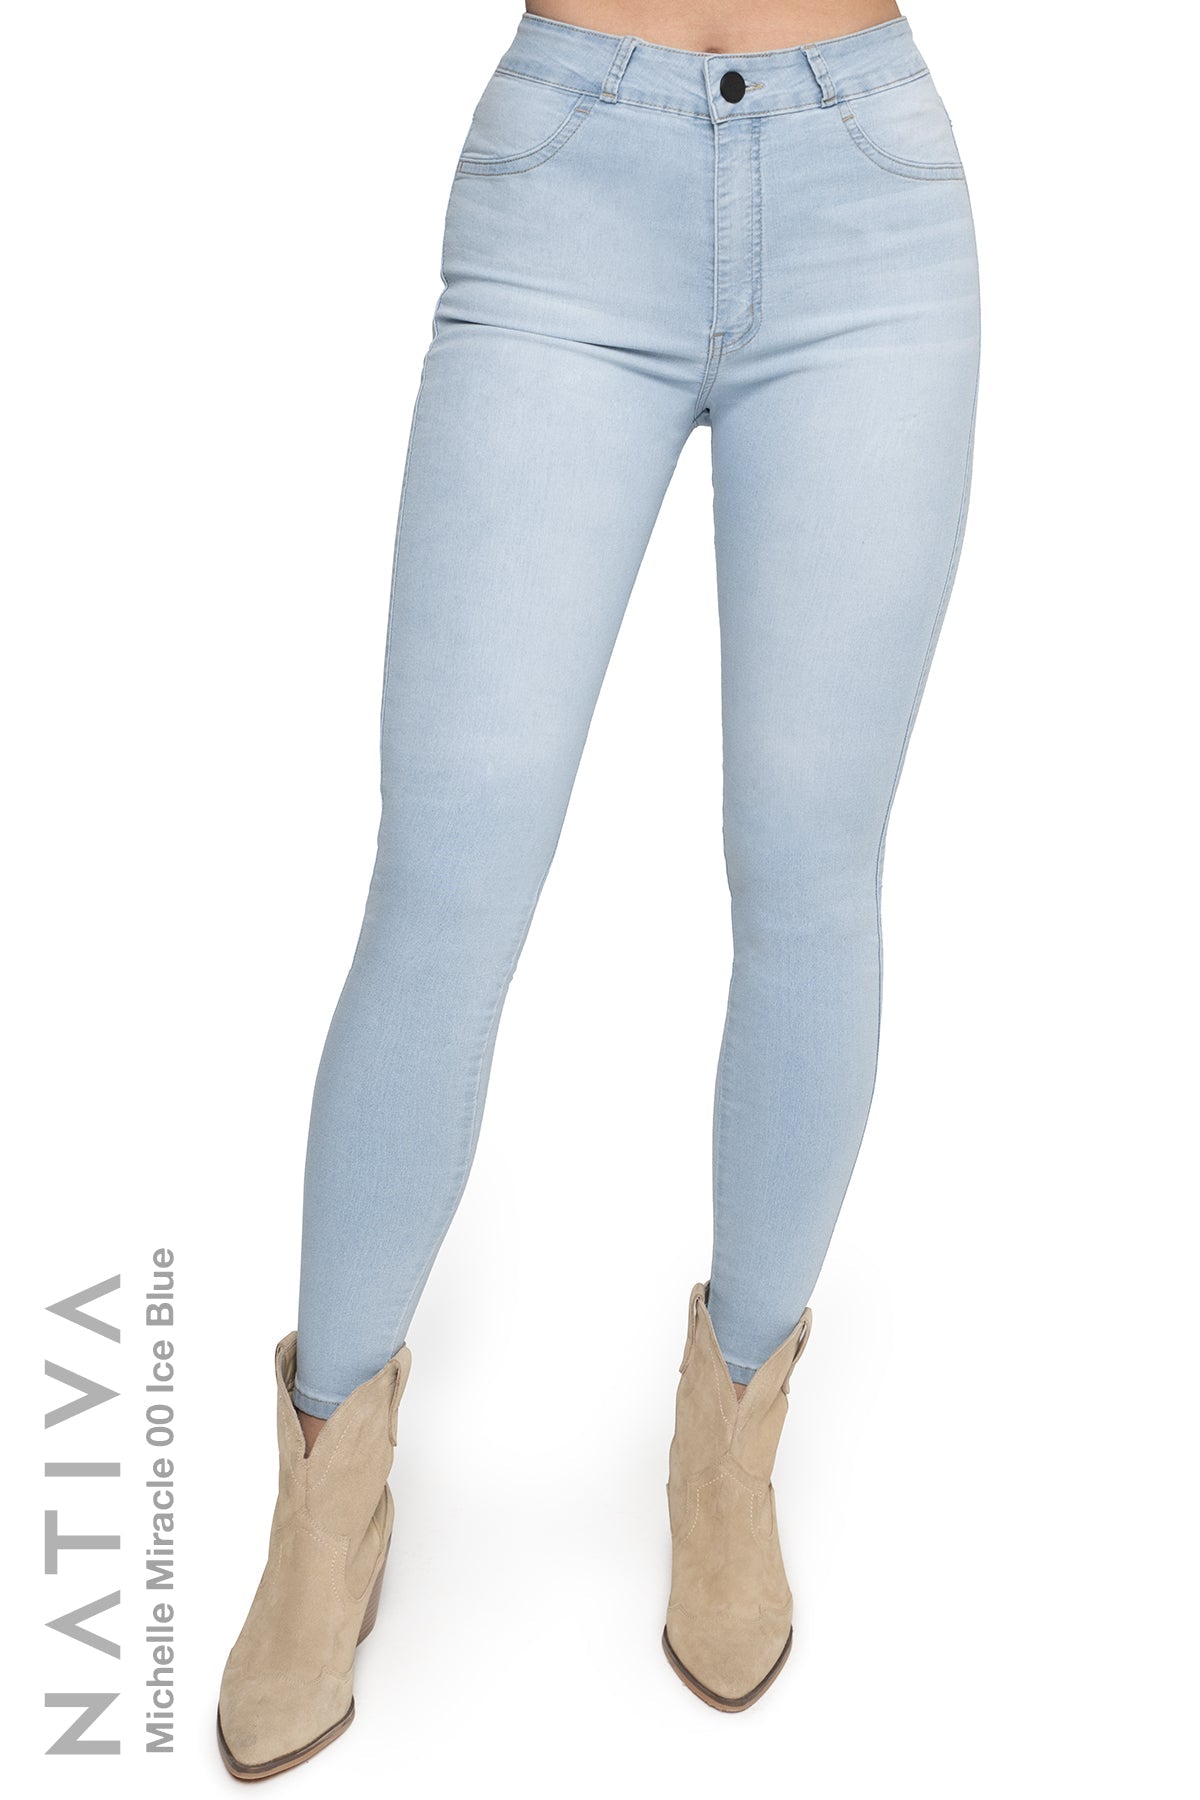 NATIVA, STRETCH JEANS. MICHELLE MIRACLE 00 ICE BLUE, High Shaping Capacity,  Extreme Motion, Hi-Rise Super Skinny Jeans